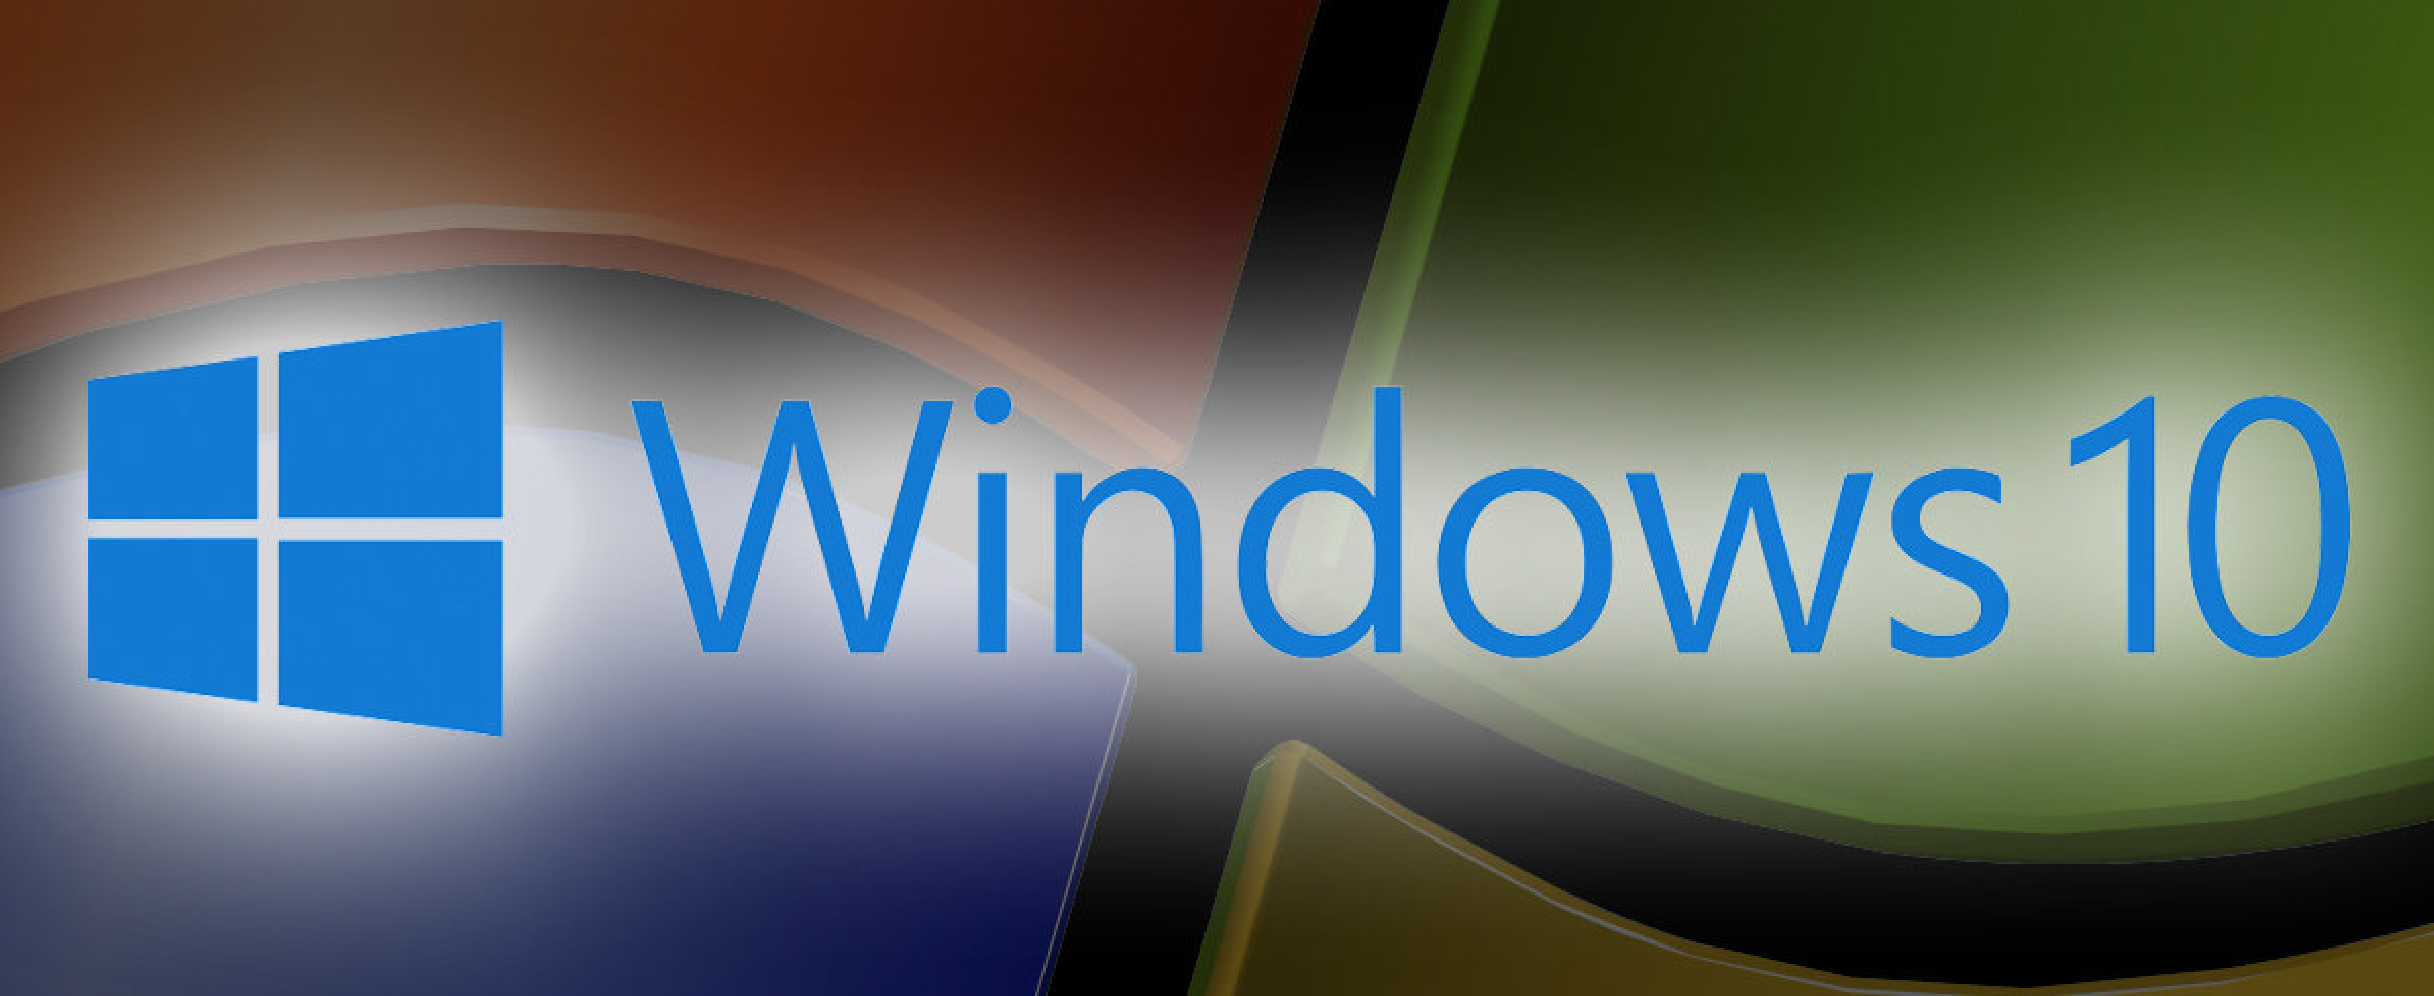 Support for Windows 7 is ending – Is it time to upgrade?